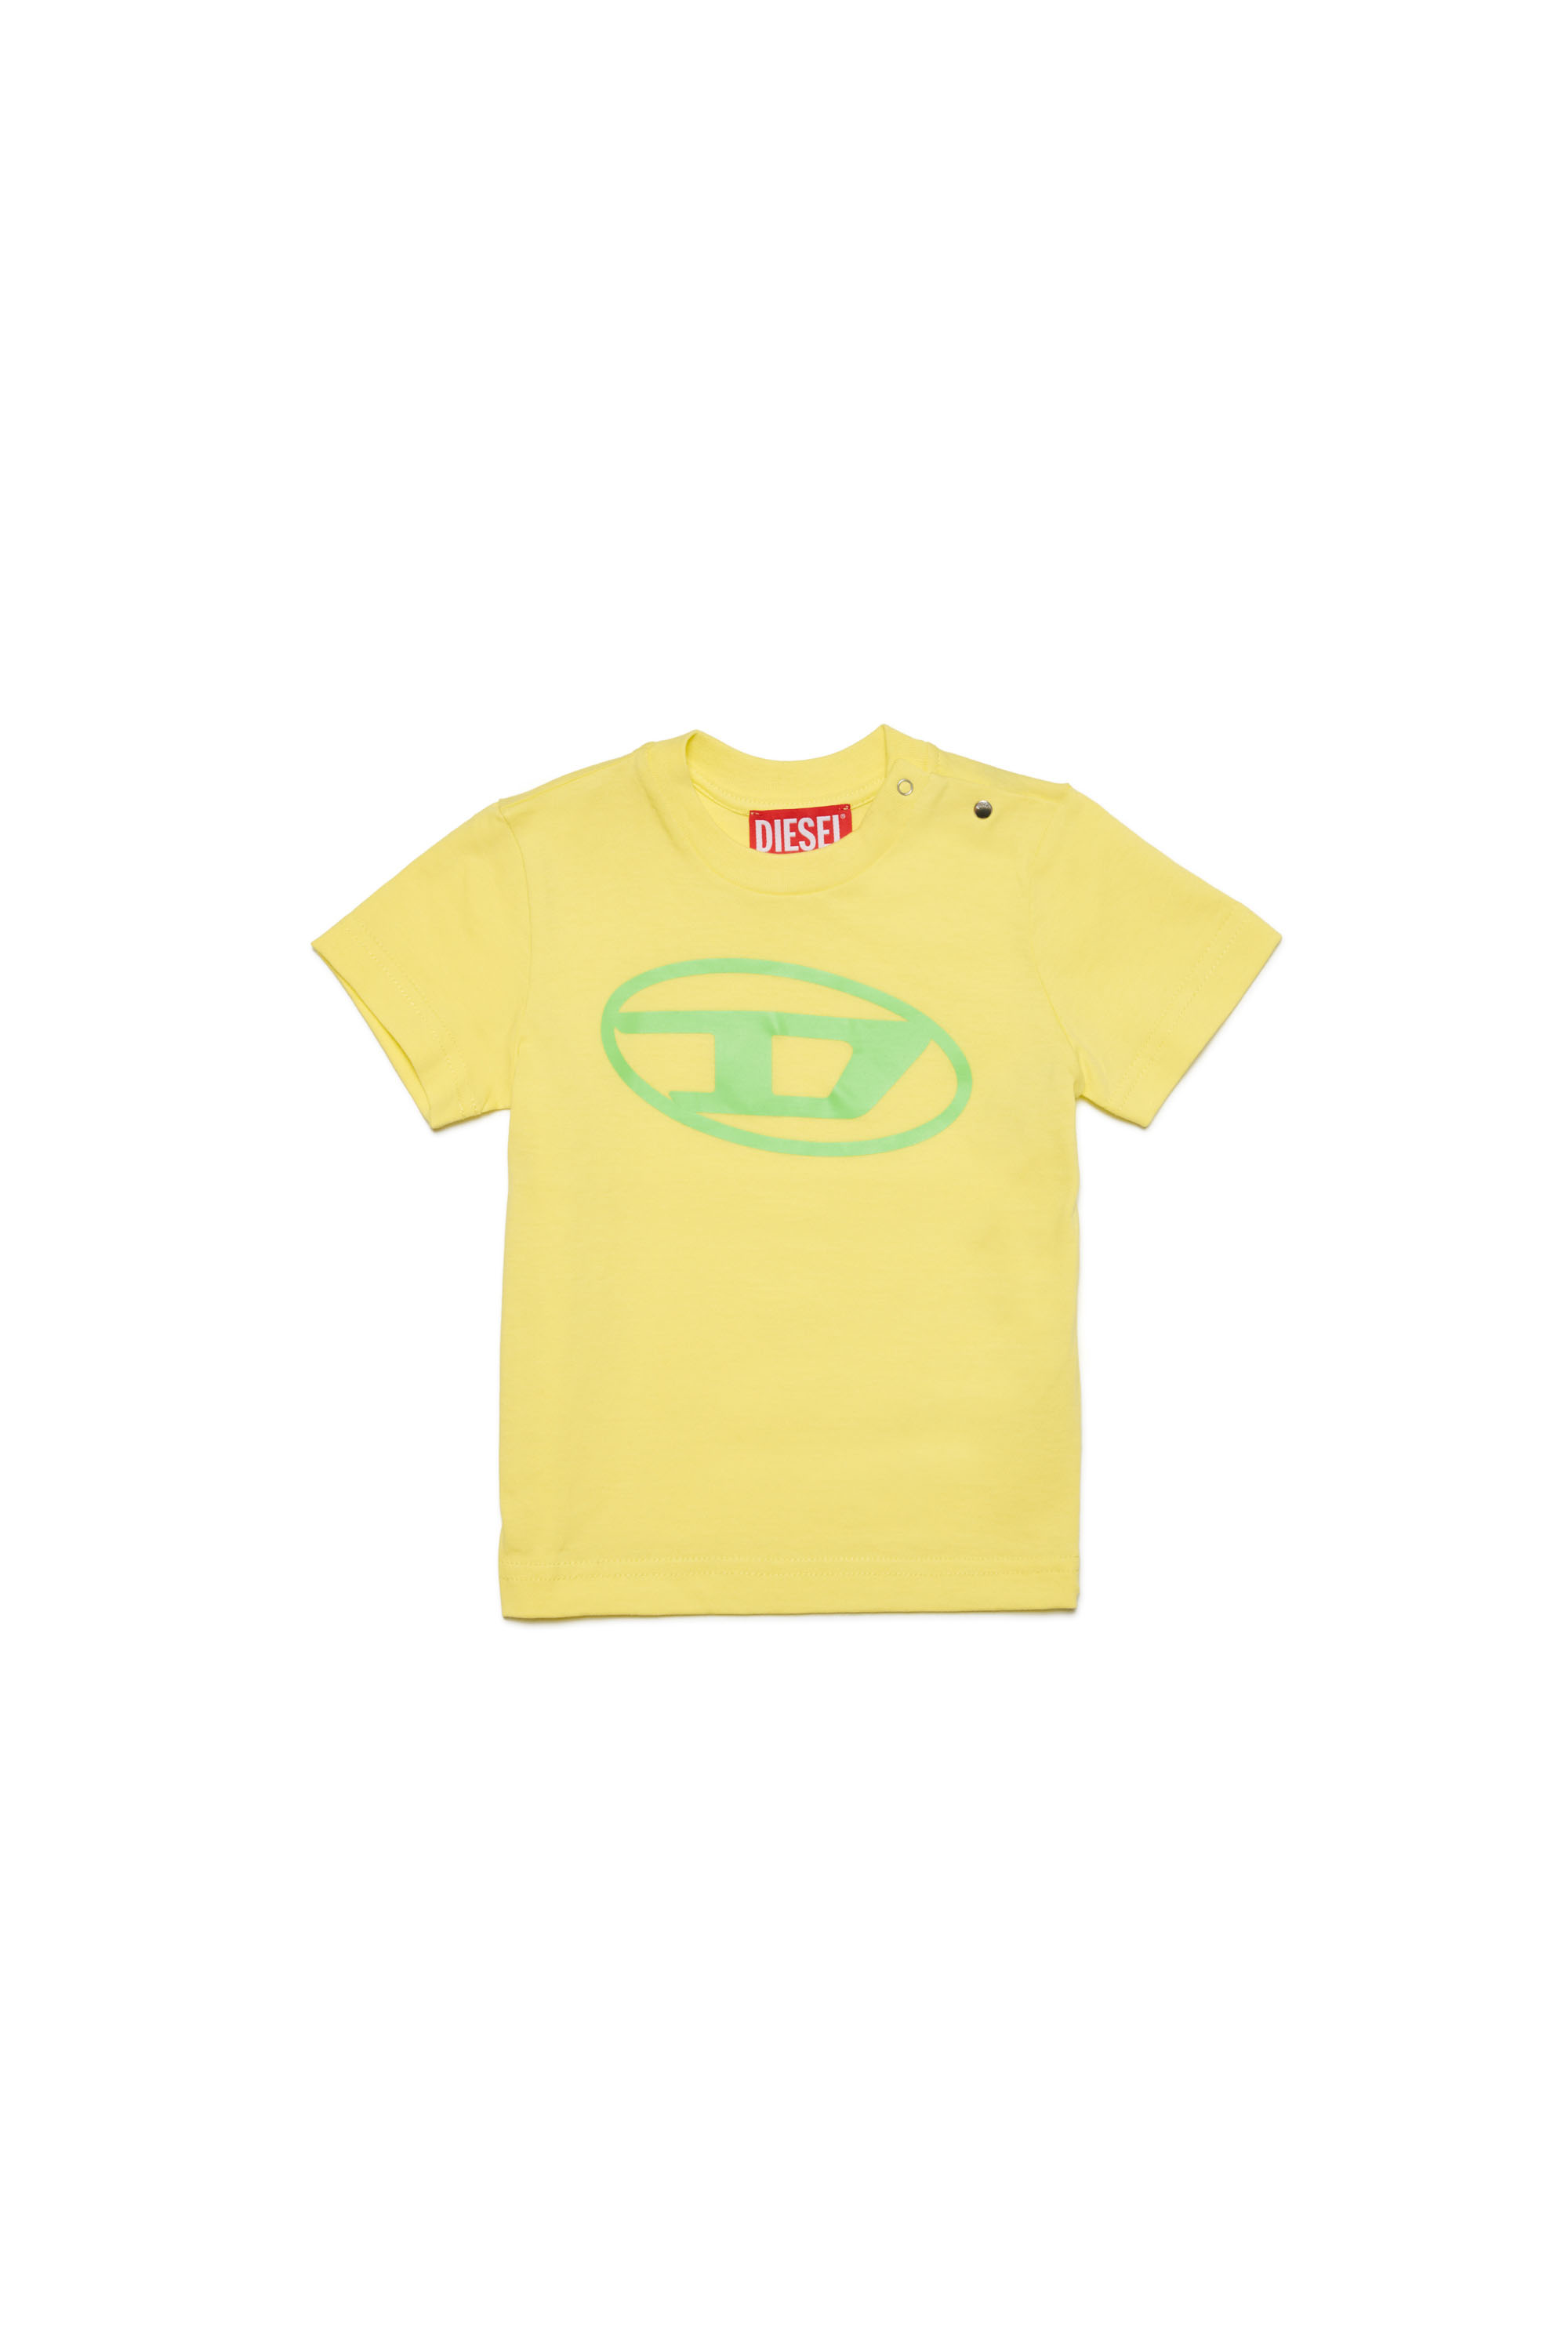 Diesel - T-shirt with Oval D logo - T-shirts and Tops - Unisex - Yellow